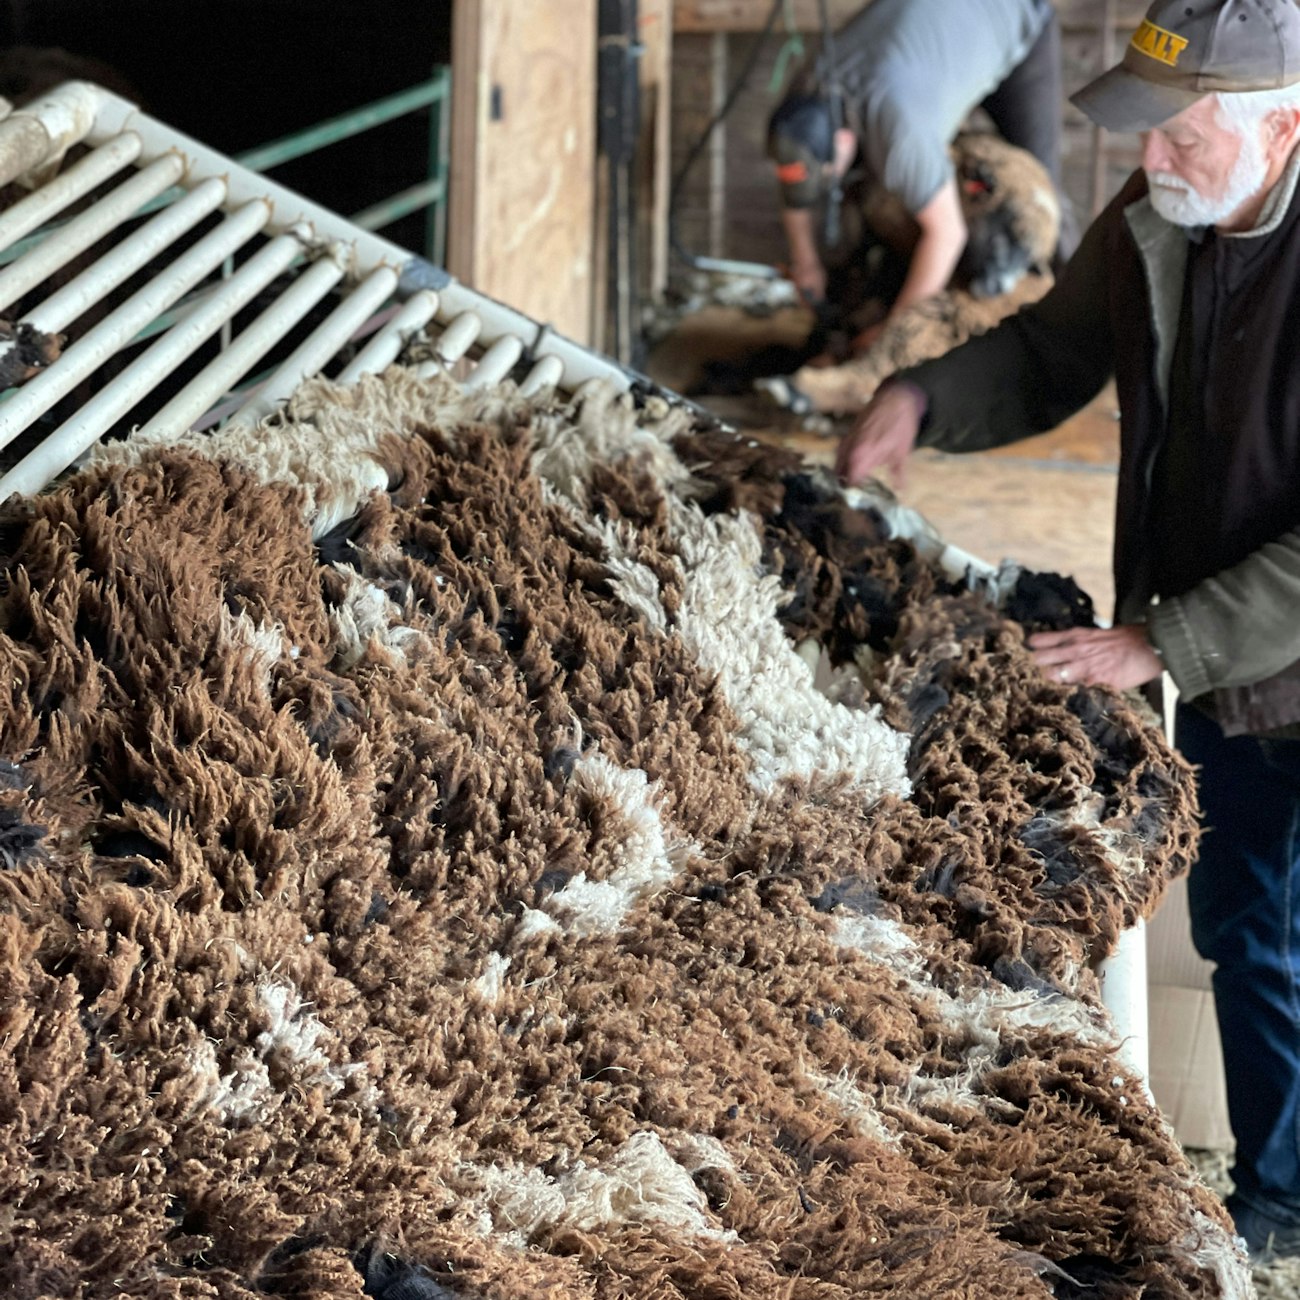 Brown and white fleece on a skirting table with man in cap touching it. In the background, another man shears a black sheep